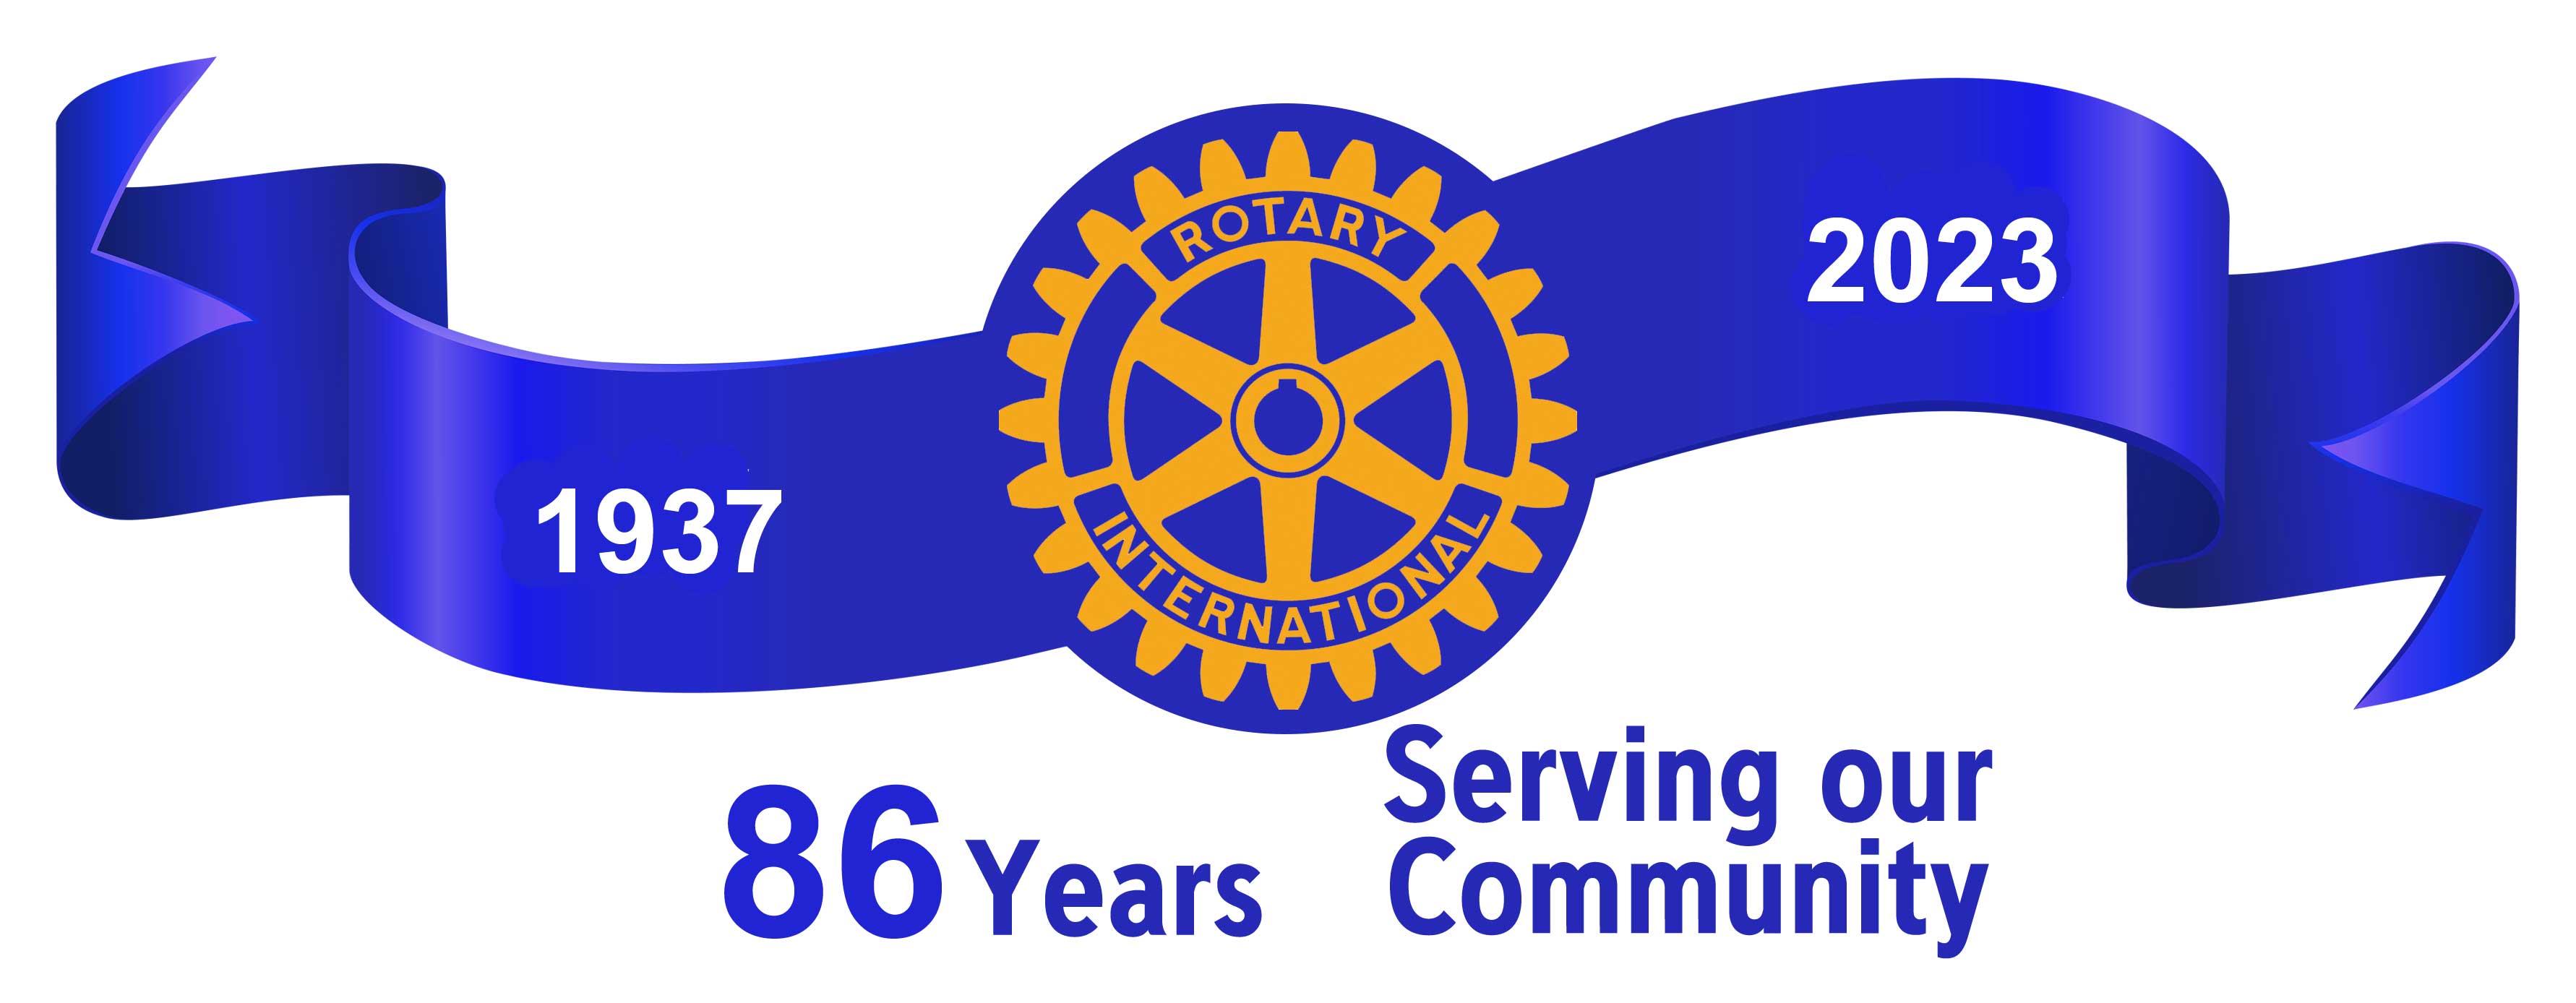 RCO 1937 to 2021. 84 Years serving our community.